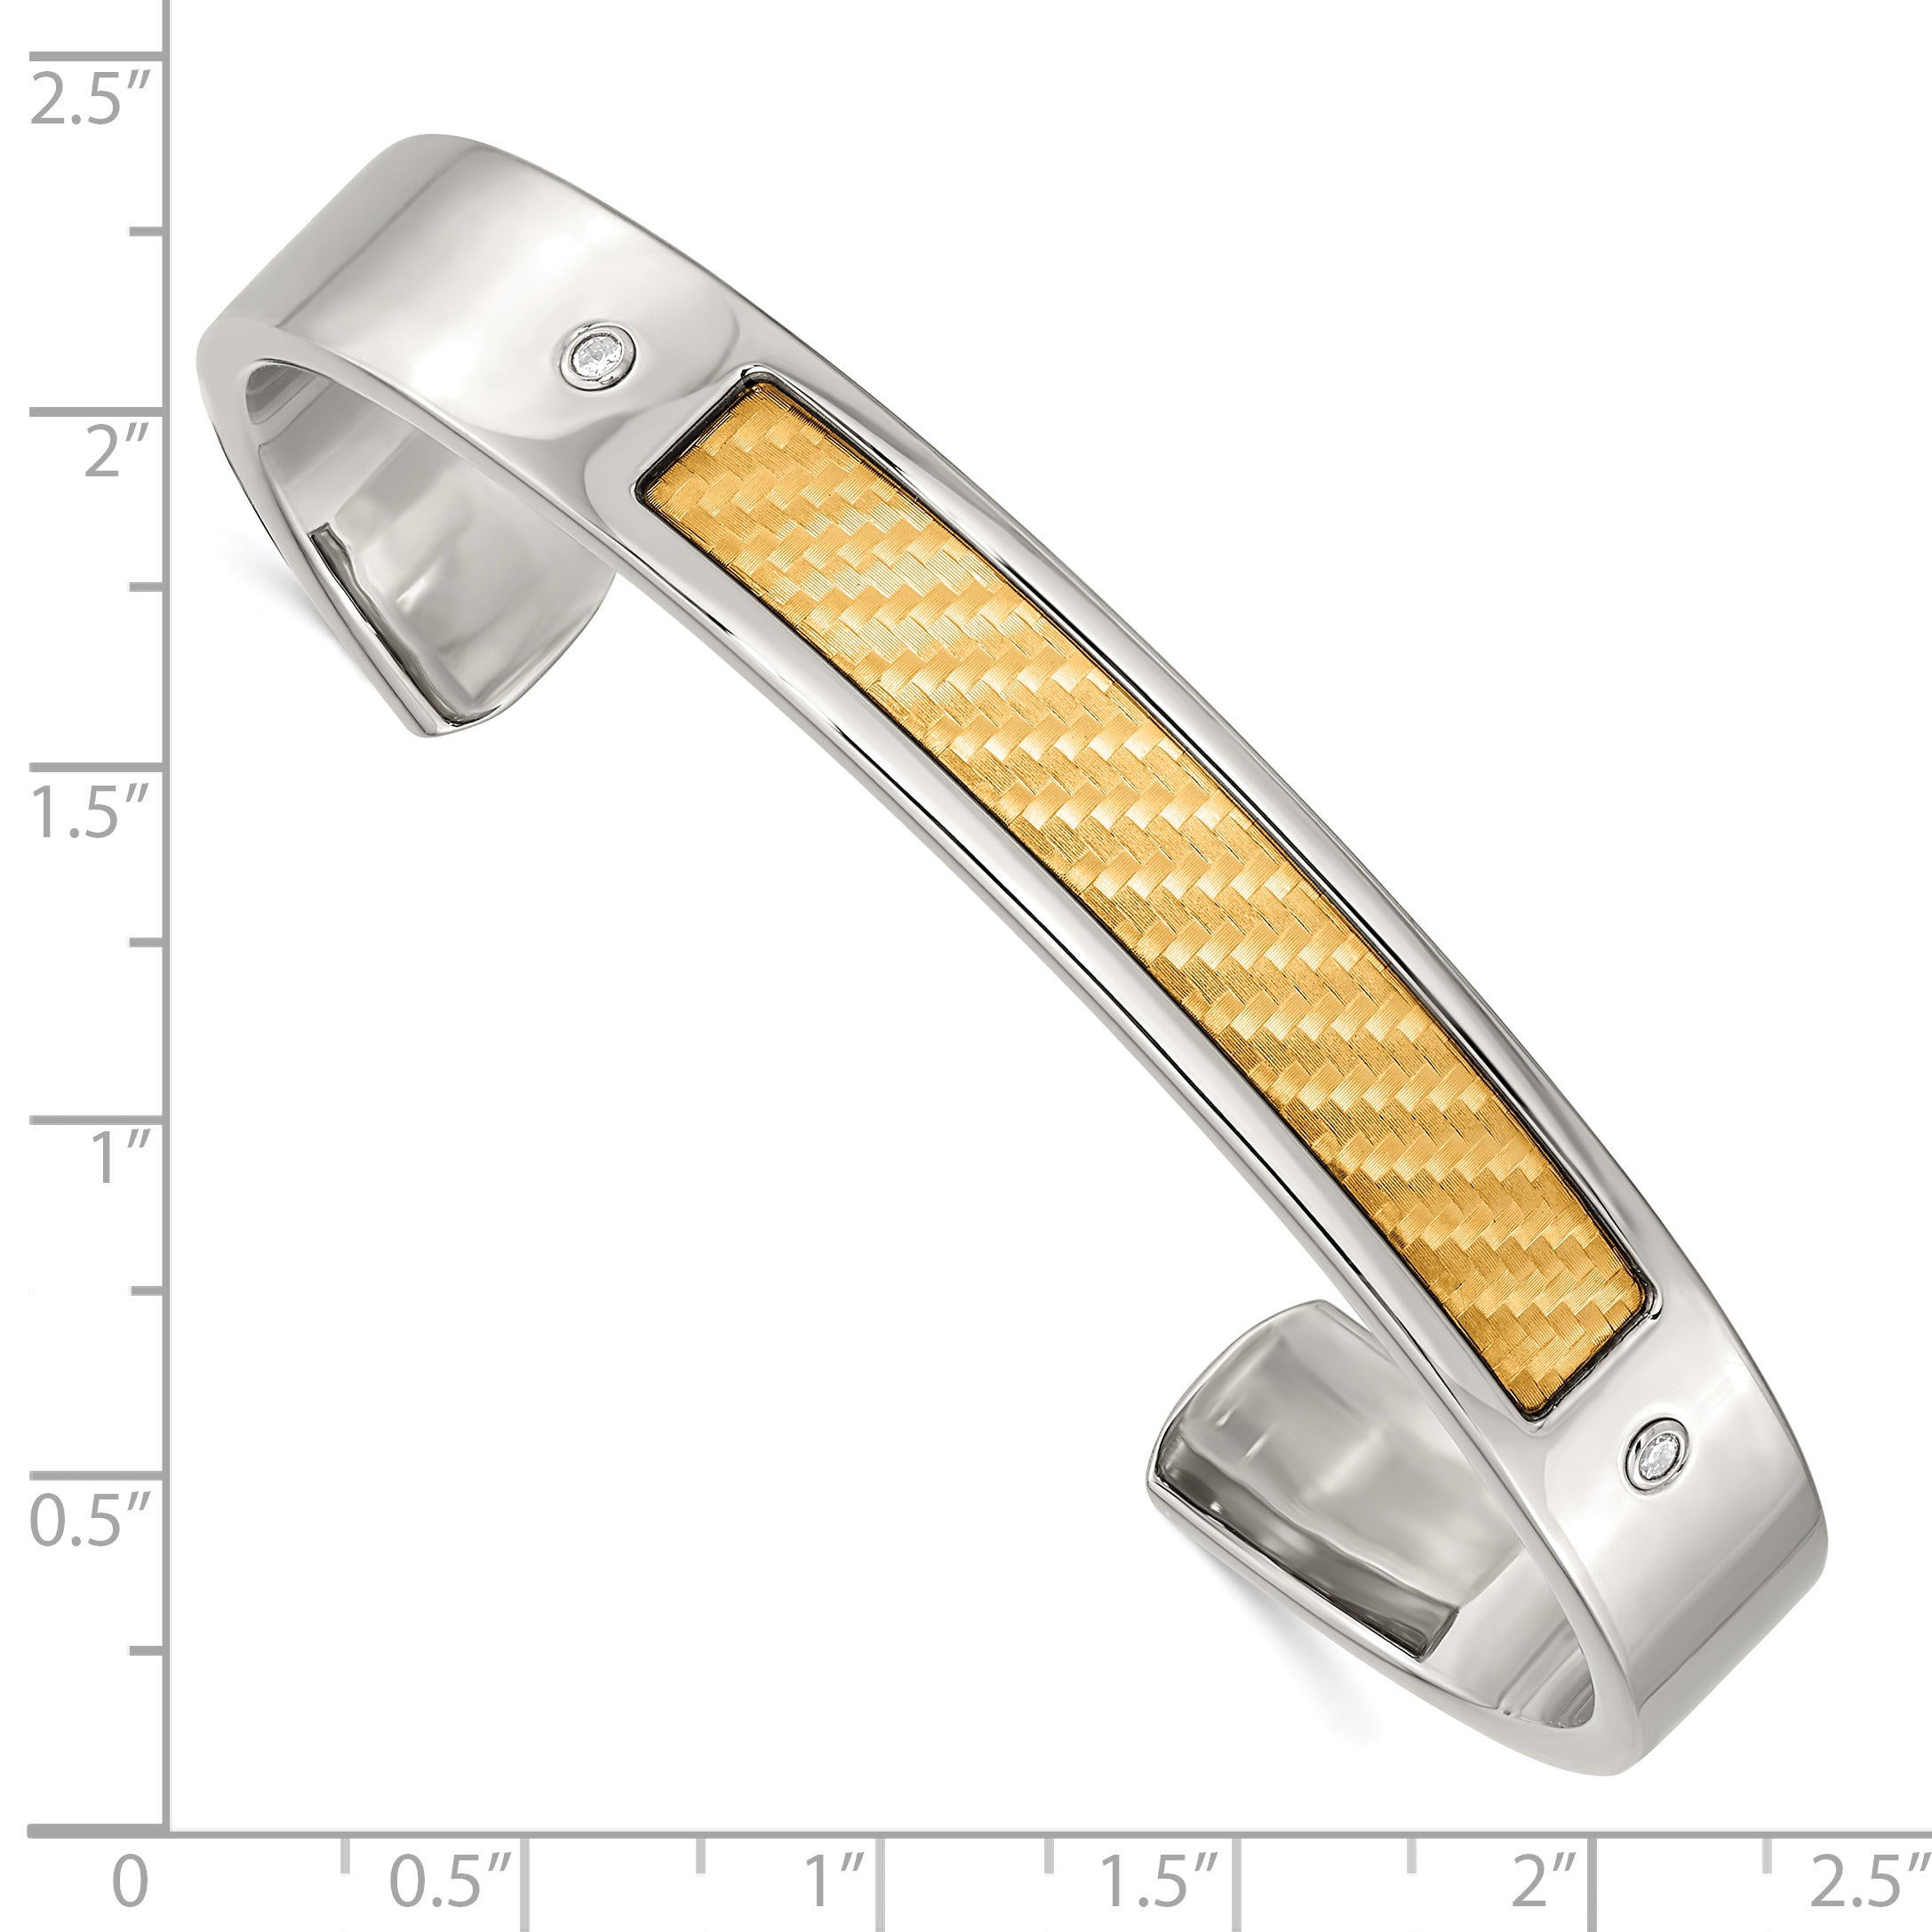 Chisel Stainless Steel with 18k Gold Accent Polished and Textured with 1/20 carat Diamond Cuff Bangle